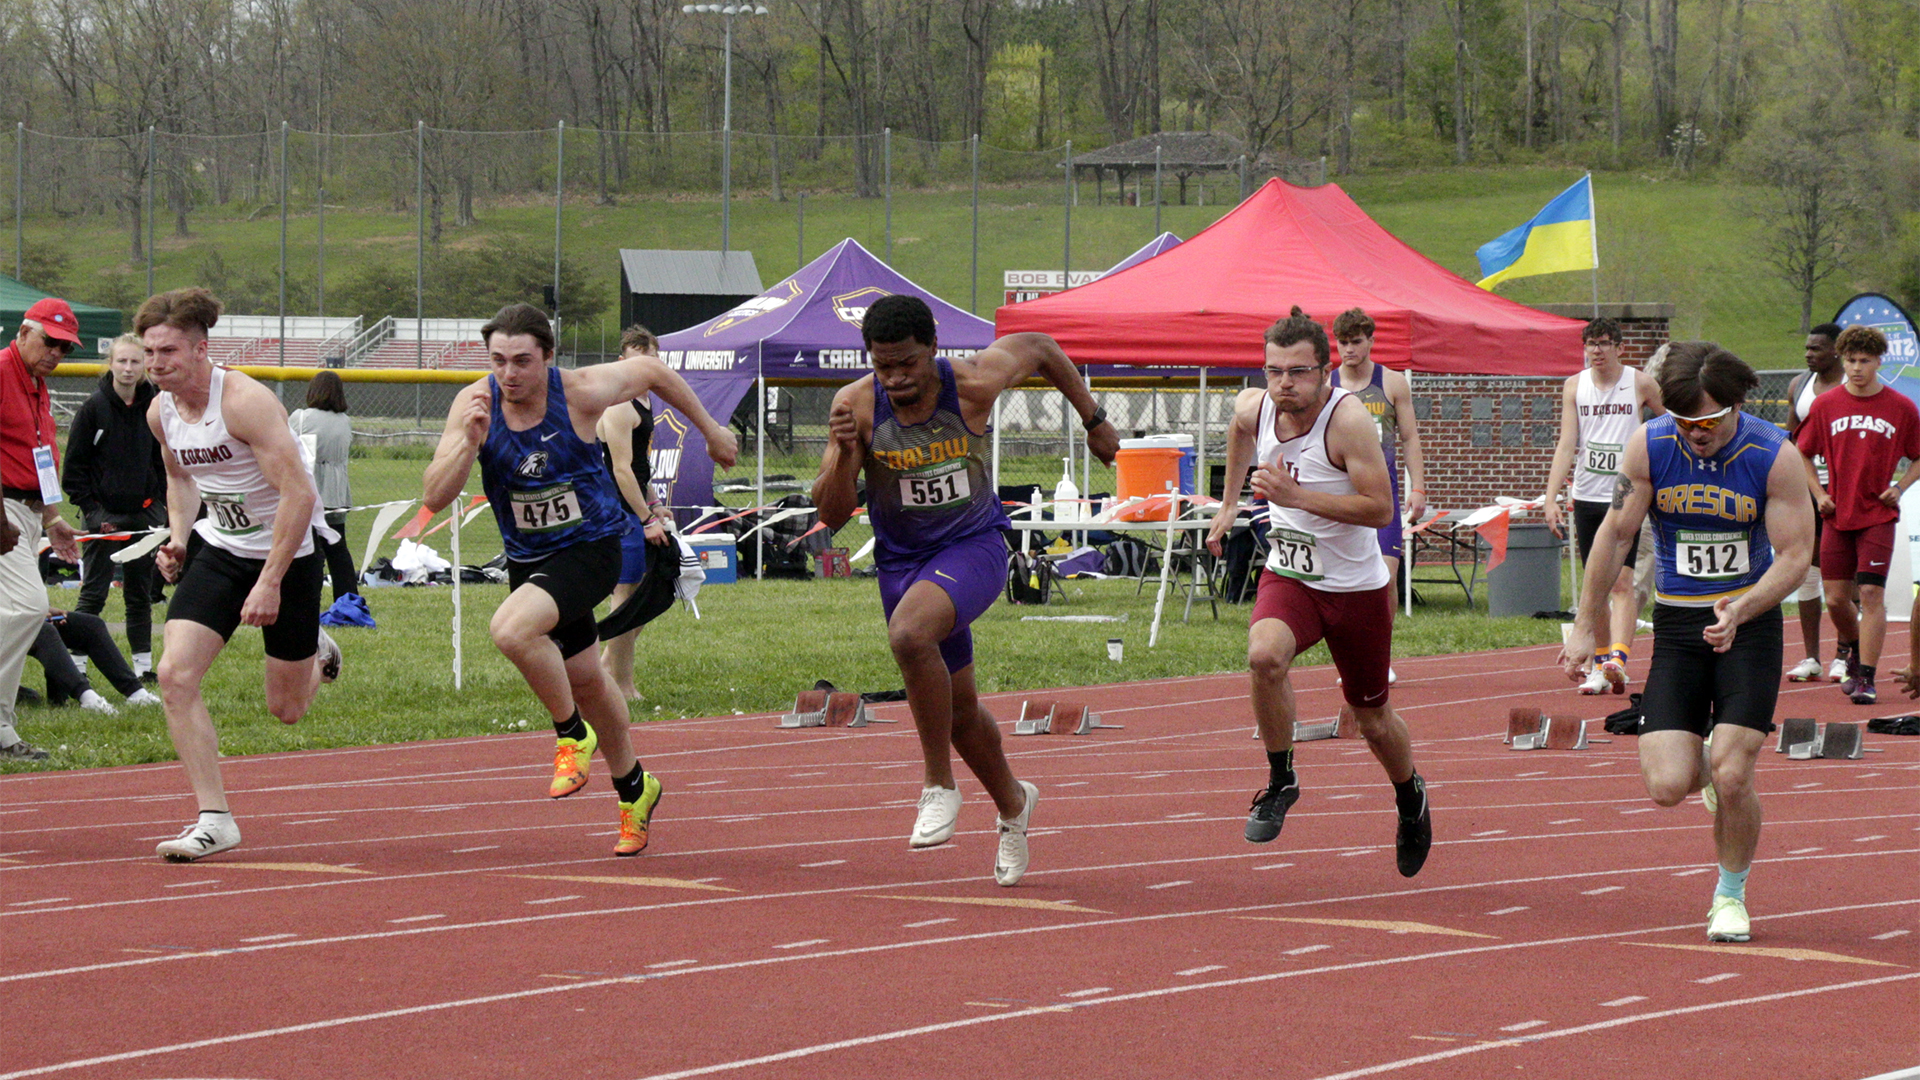 Tyhir Royster broke his own school record in the 200. Archived photo by Karina Graziani.